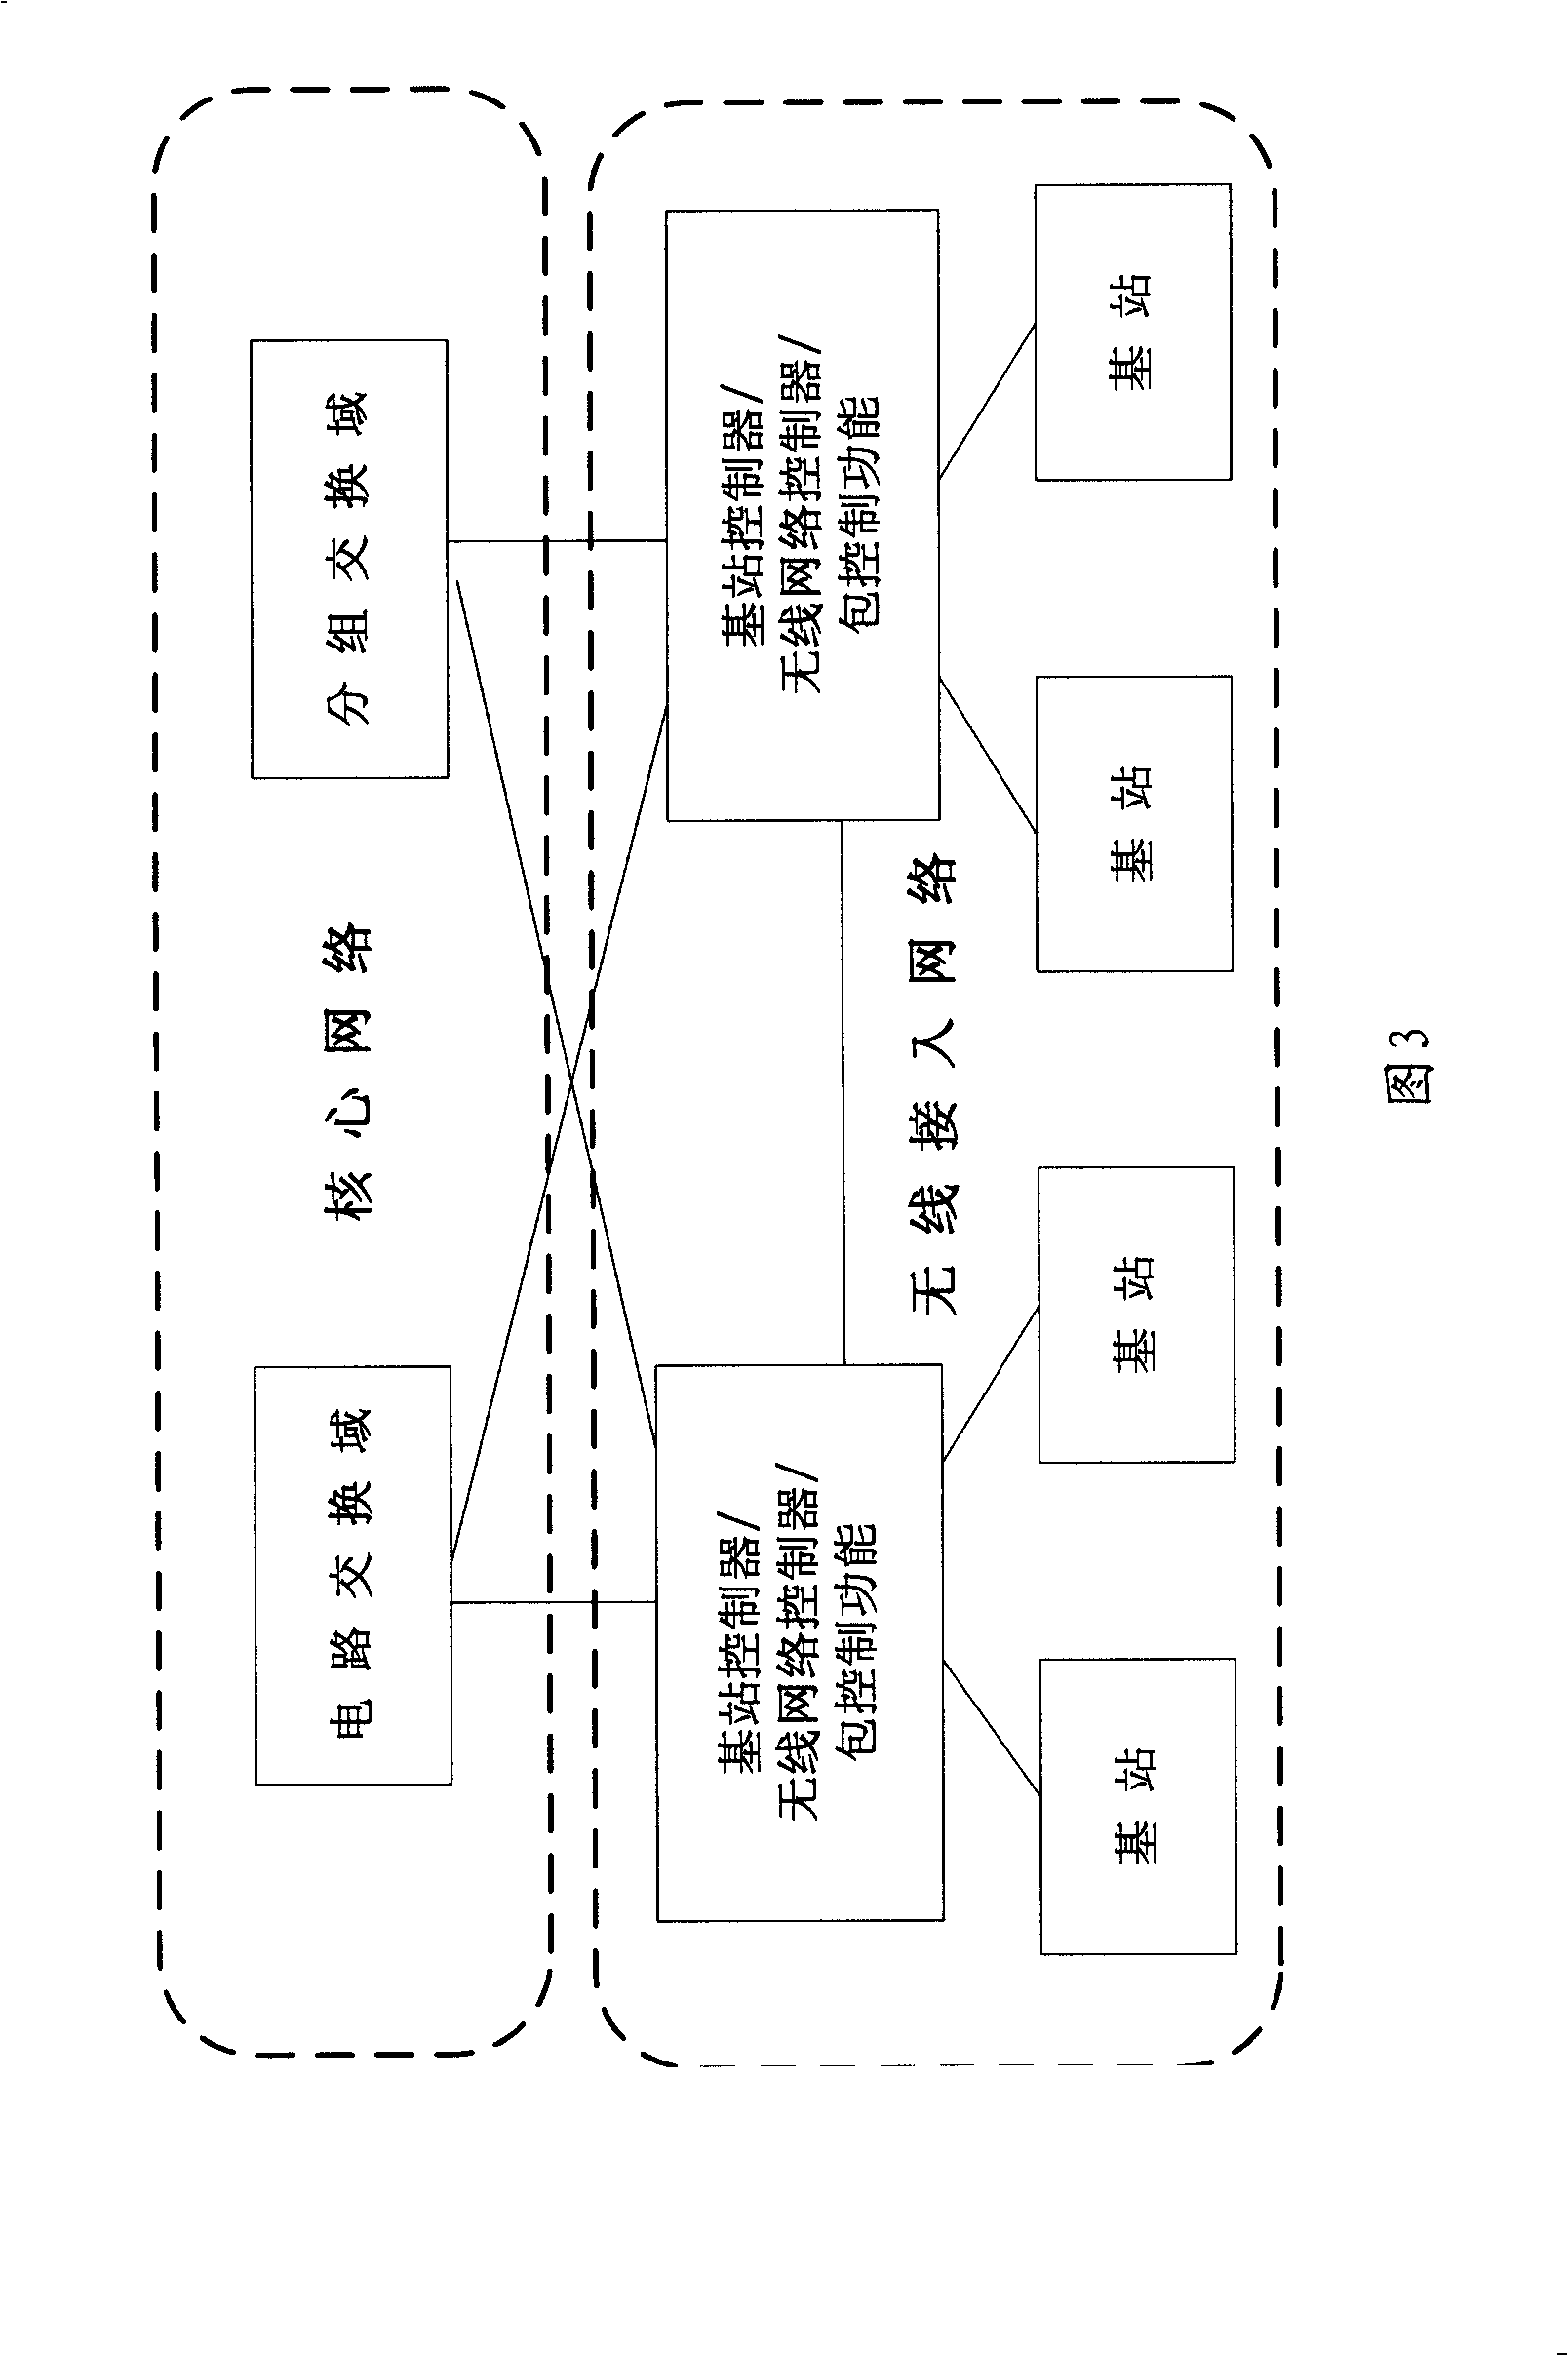 A system and method for realizing the network interconnection under the wireless network layer